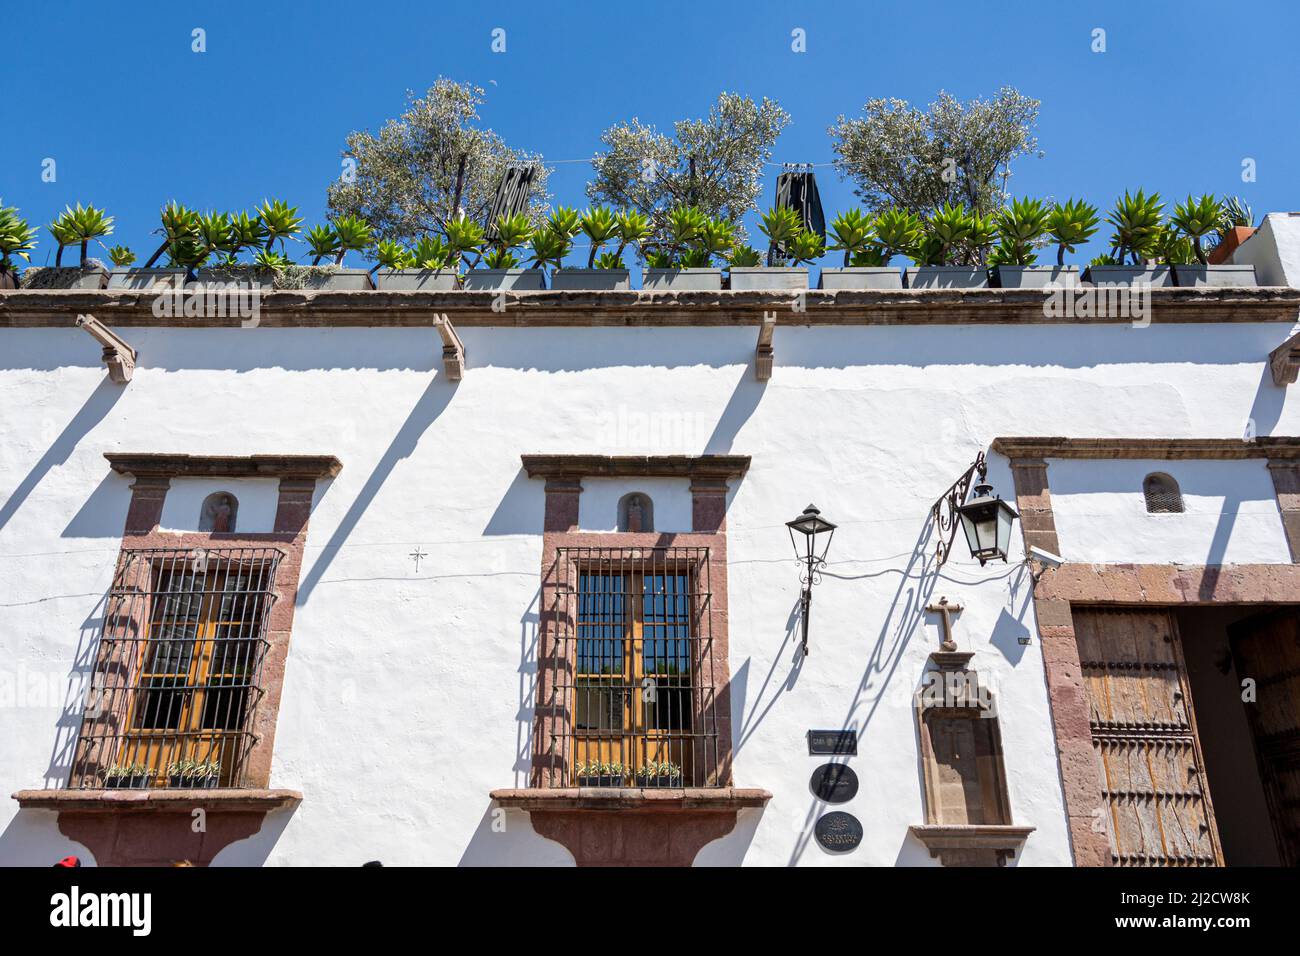 The facade of a home decorated with plants and wrought iron bars. San Miguel de Allende, Guanajuato, Mexico. Stock Photo